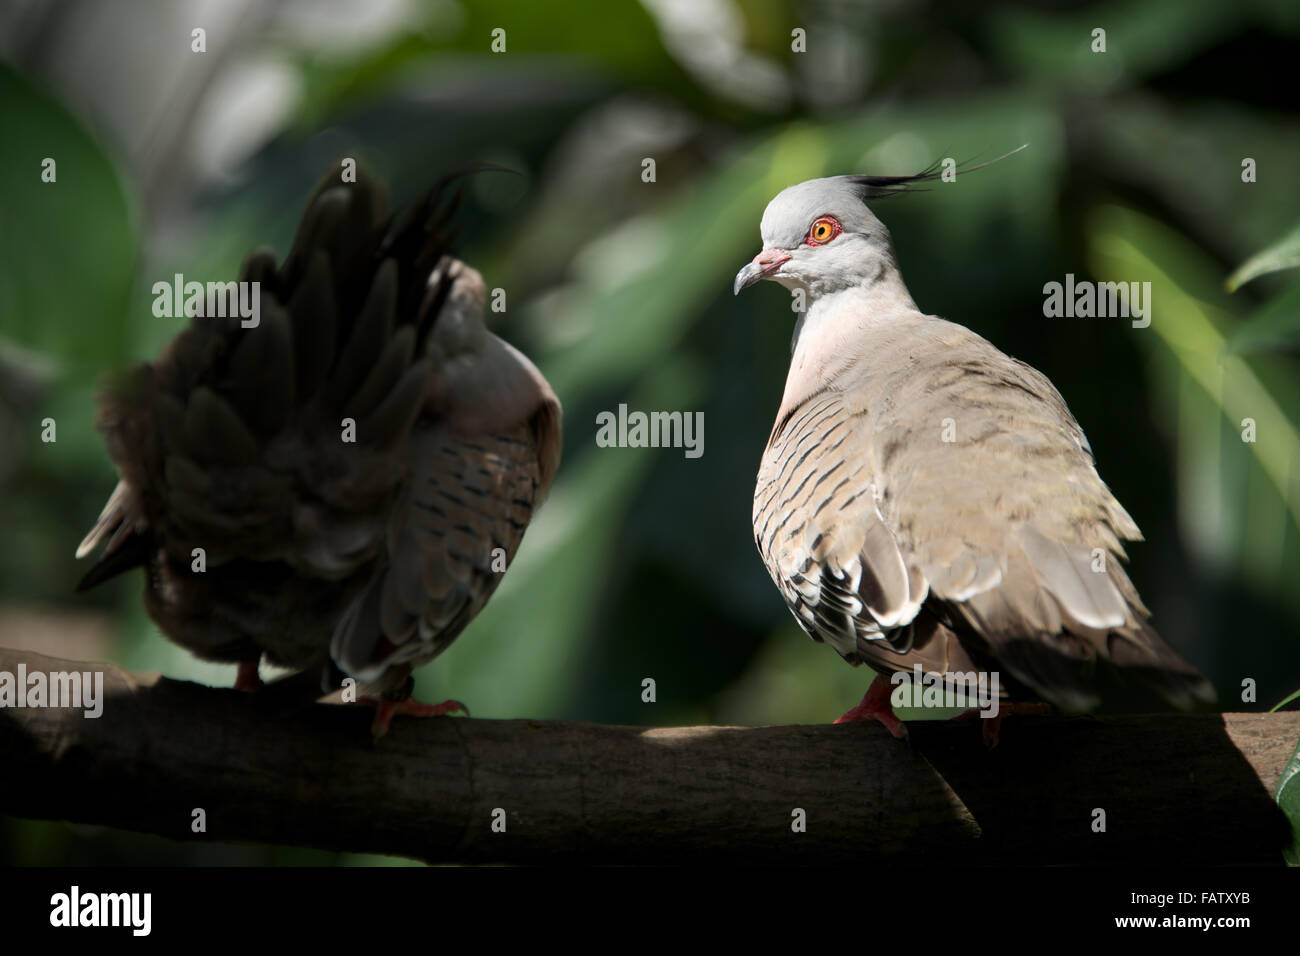 Close-up of two crested pigeons on branch Stock Photo